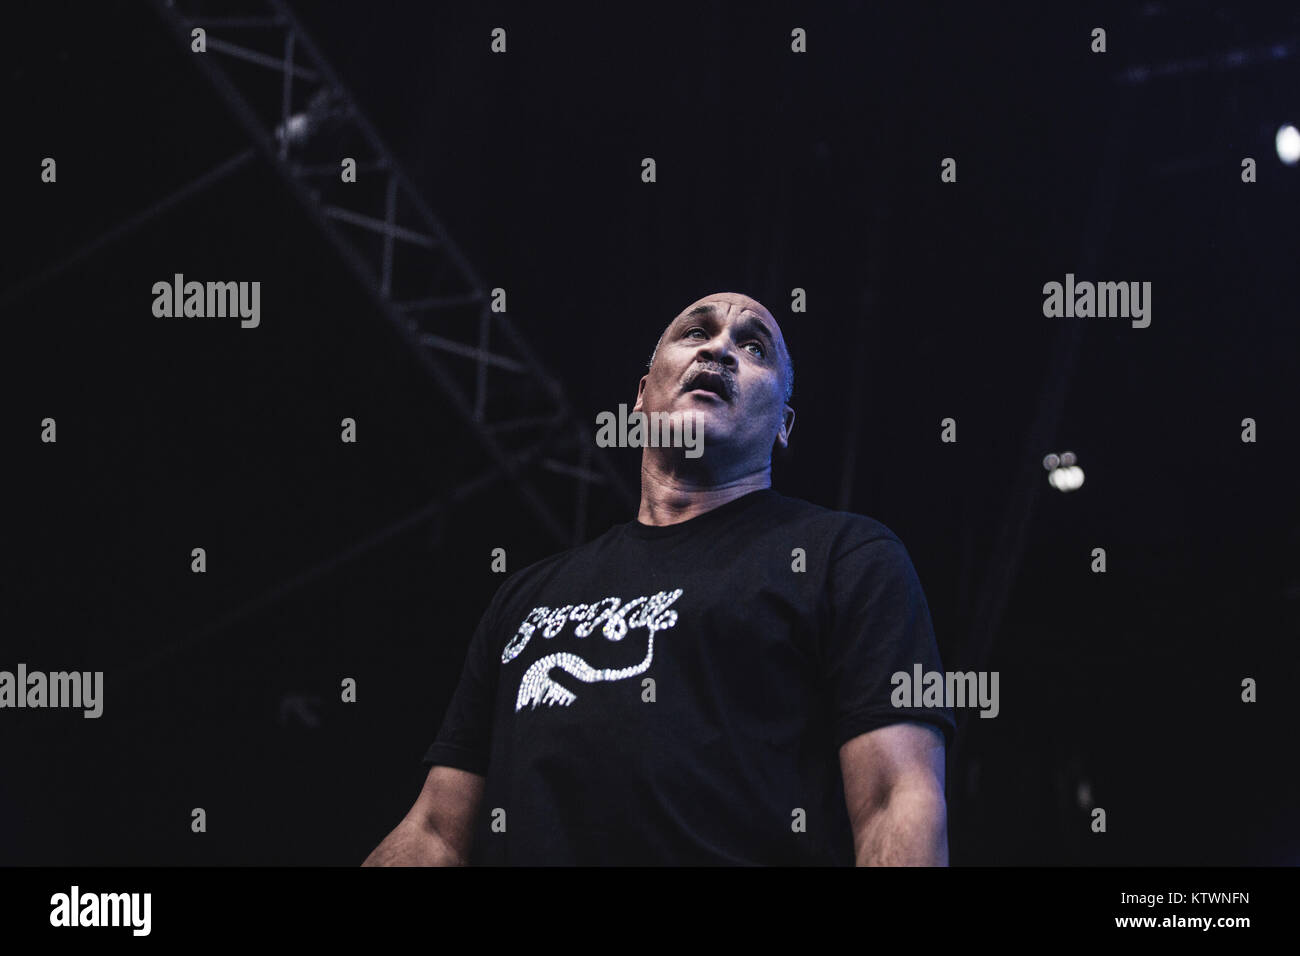 The American hip hop and rap group The Sugarhill Gang performs a live concert at the Danish music festival Vanguard Music Festival 2015 in Copenhagen. Denmark, 31/07 2015. Stock Photo